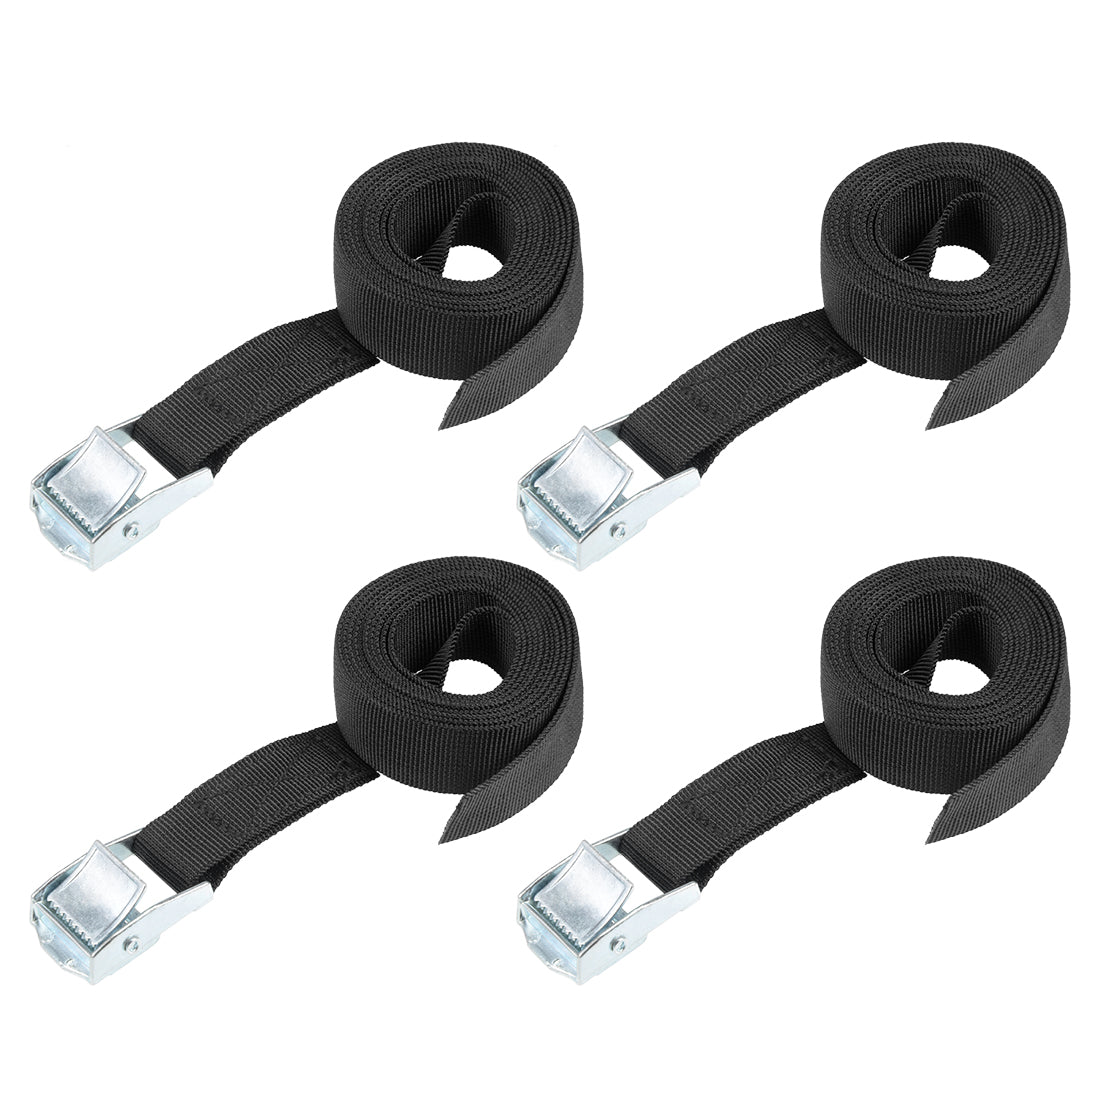 uxcell Uxcell 2M x 25mm Lashing Strap Cargo Tie Down Straps Buckle Up to 80Kg, Black, 4Pcs